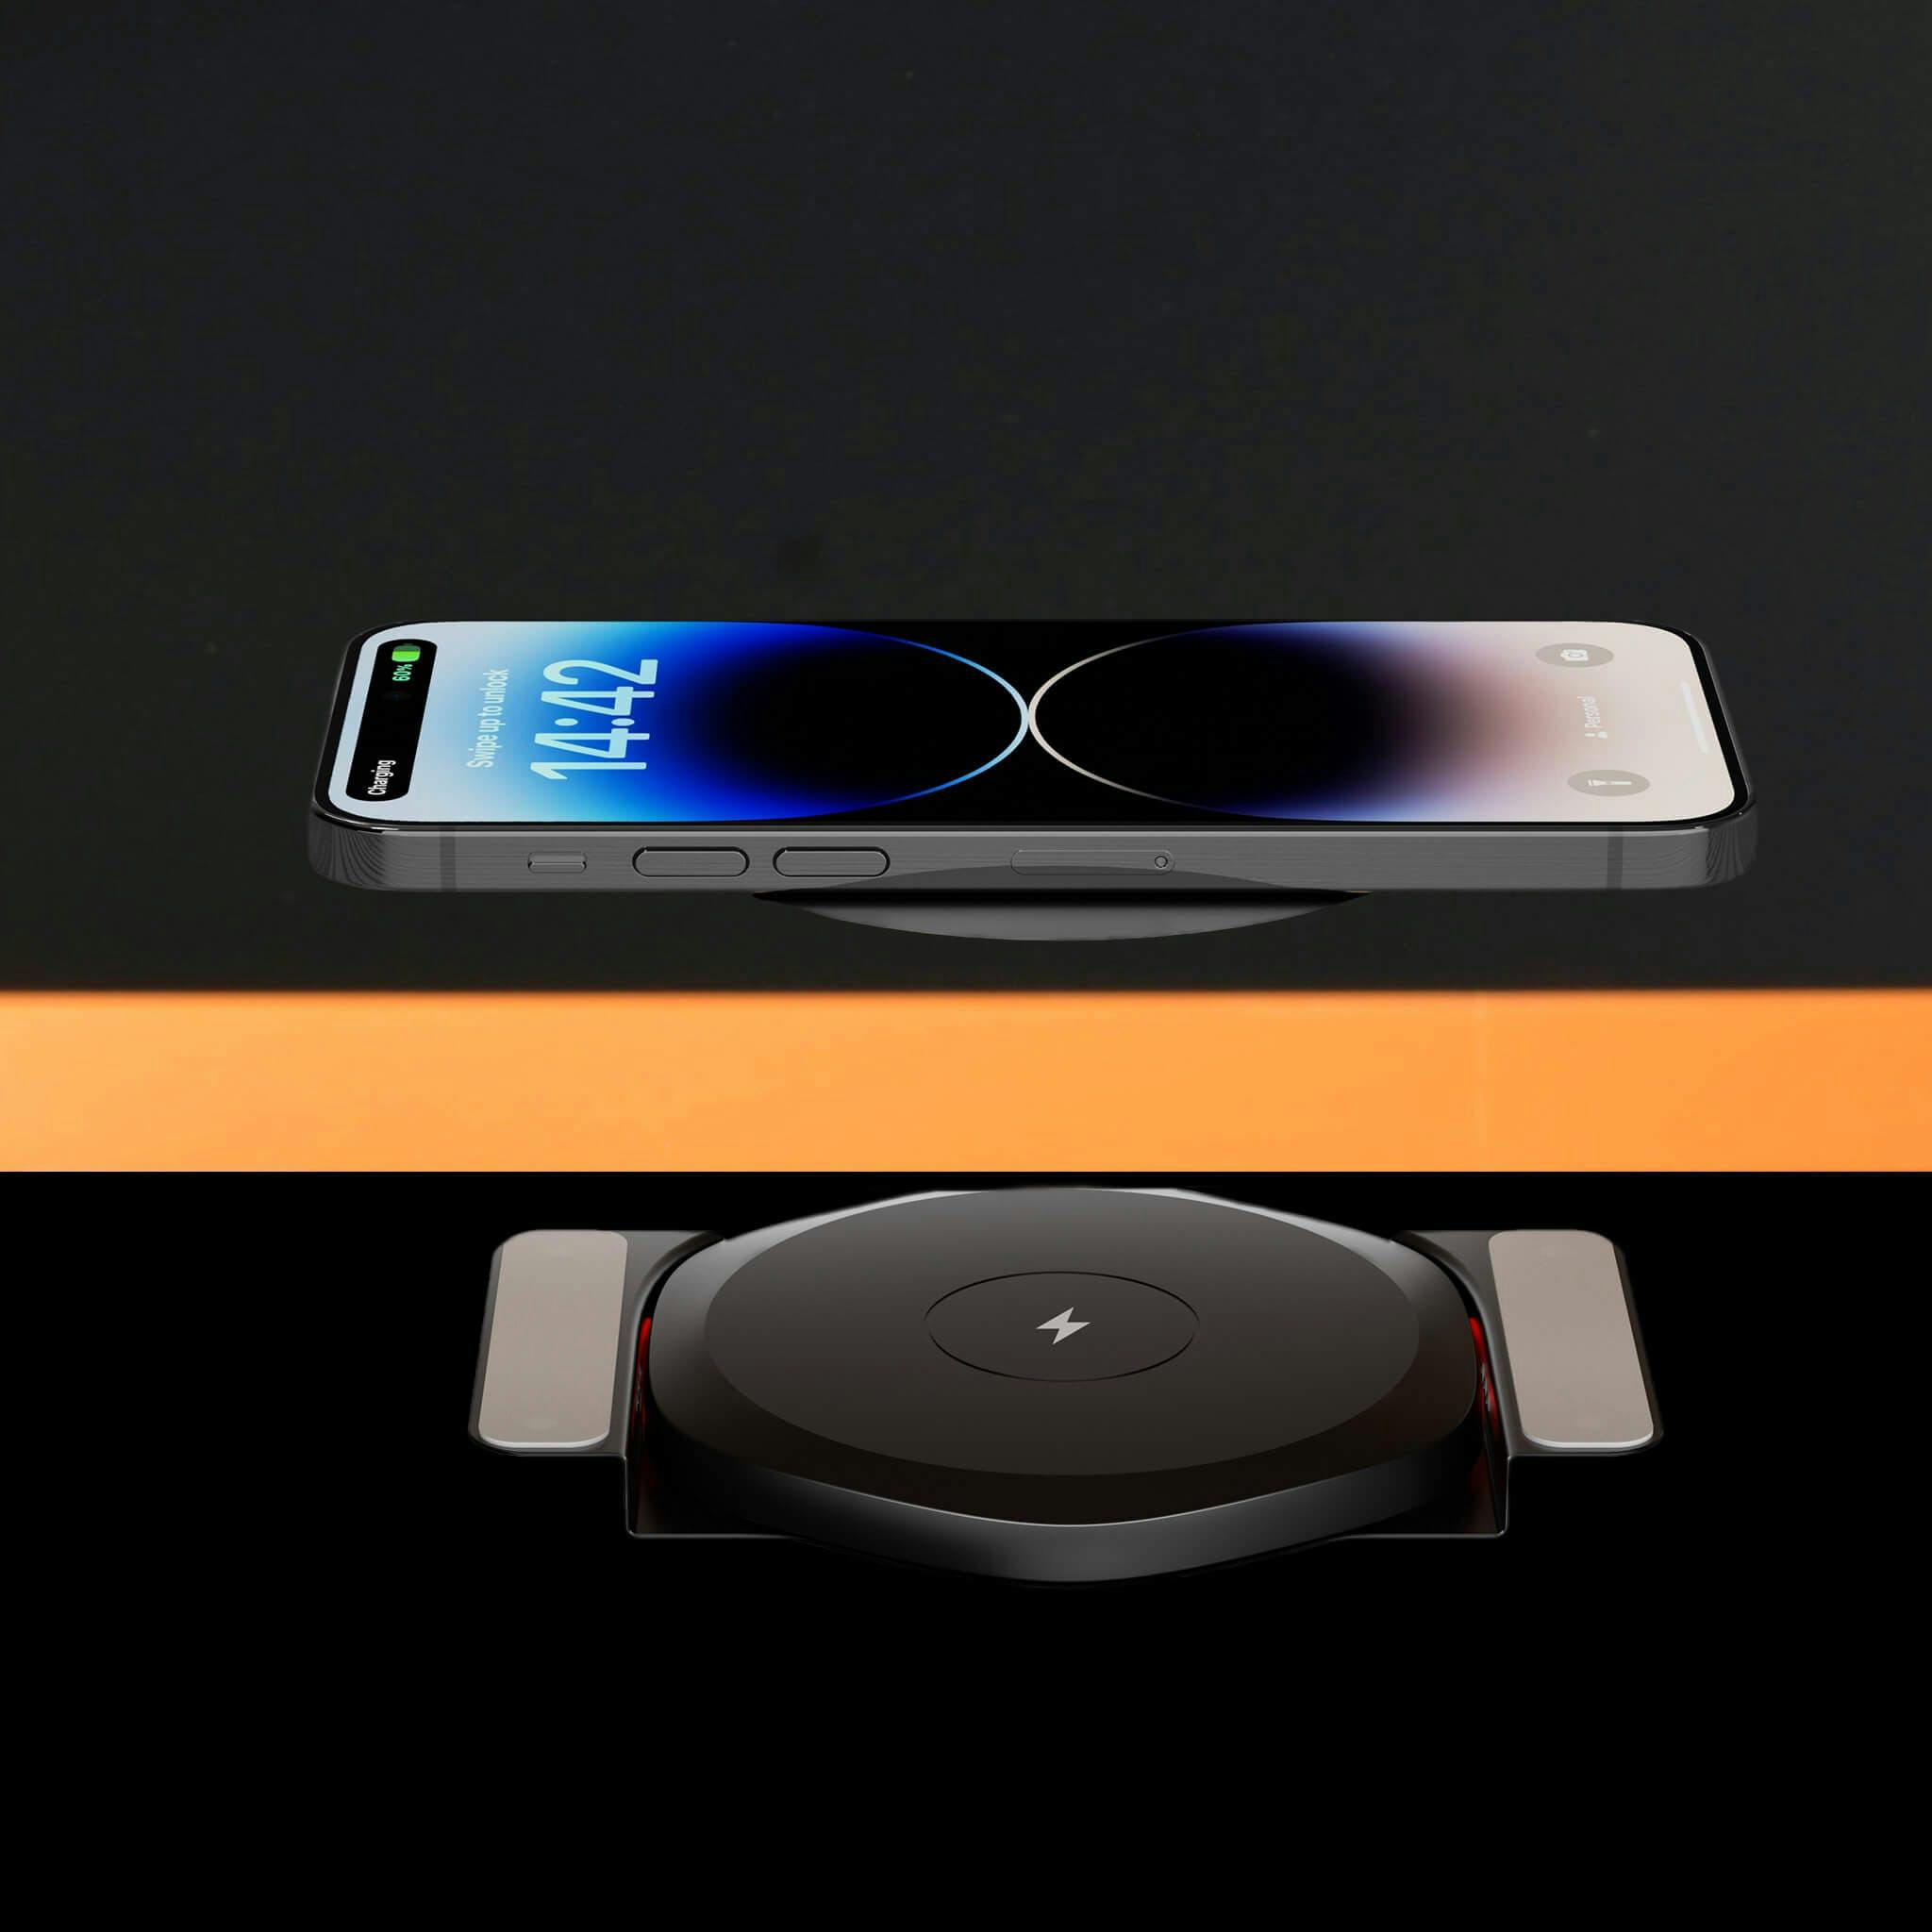 The LeetDesk Wireless Charger charges all Qi-compatible devices through the tabletop